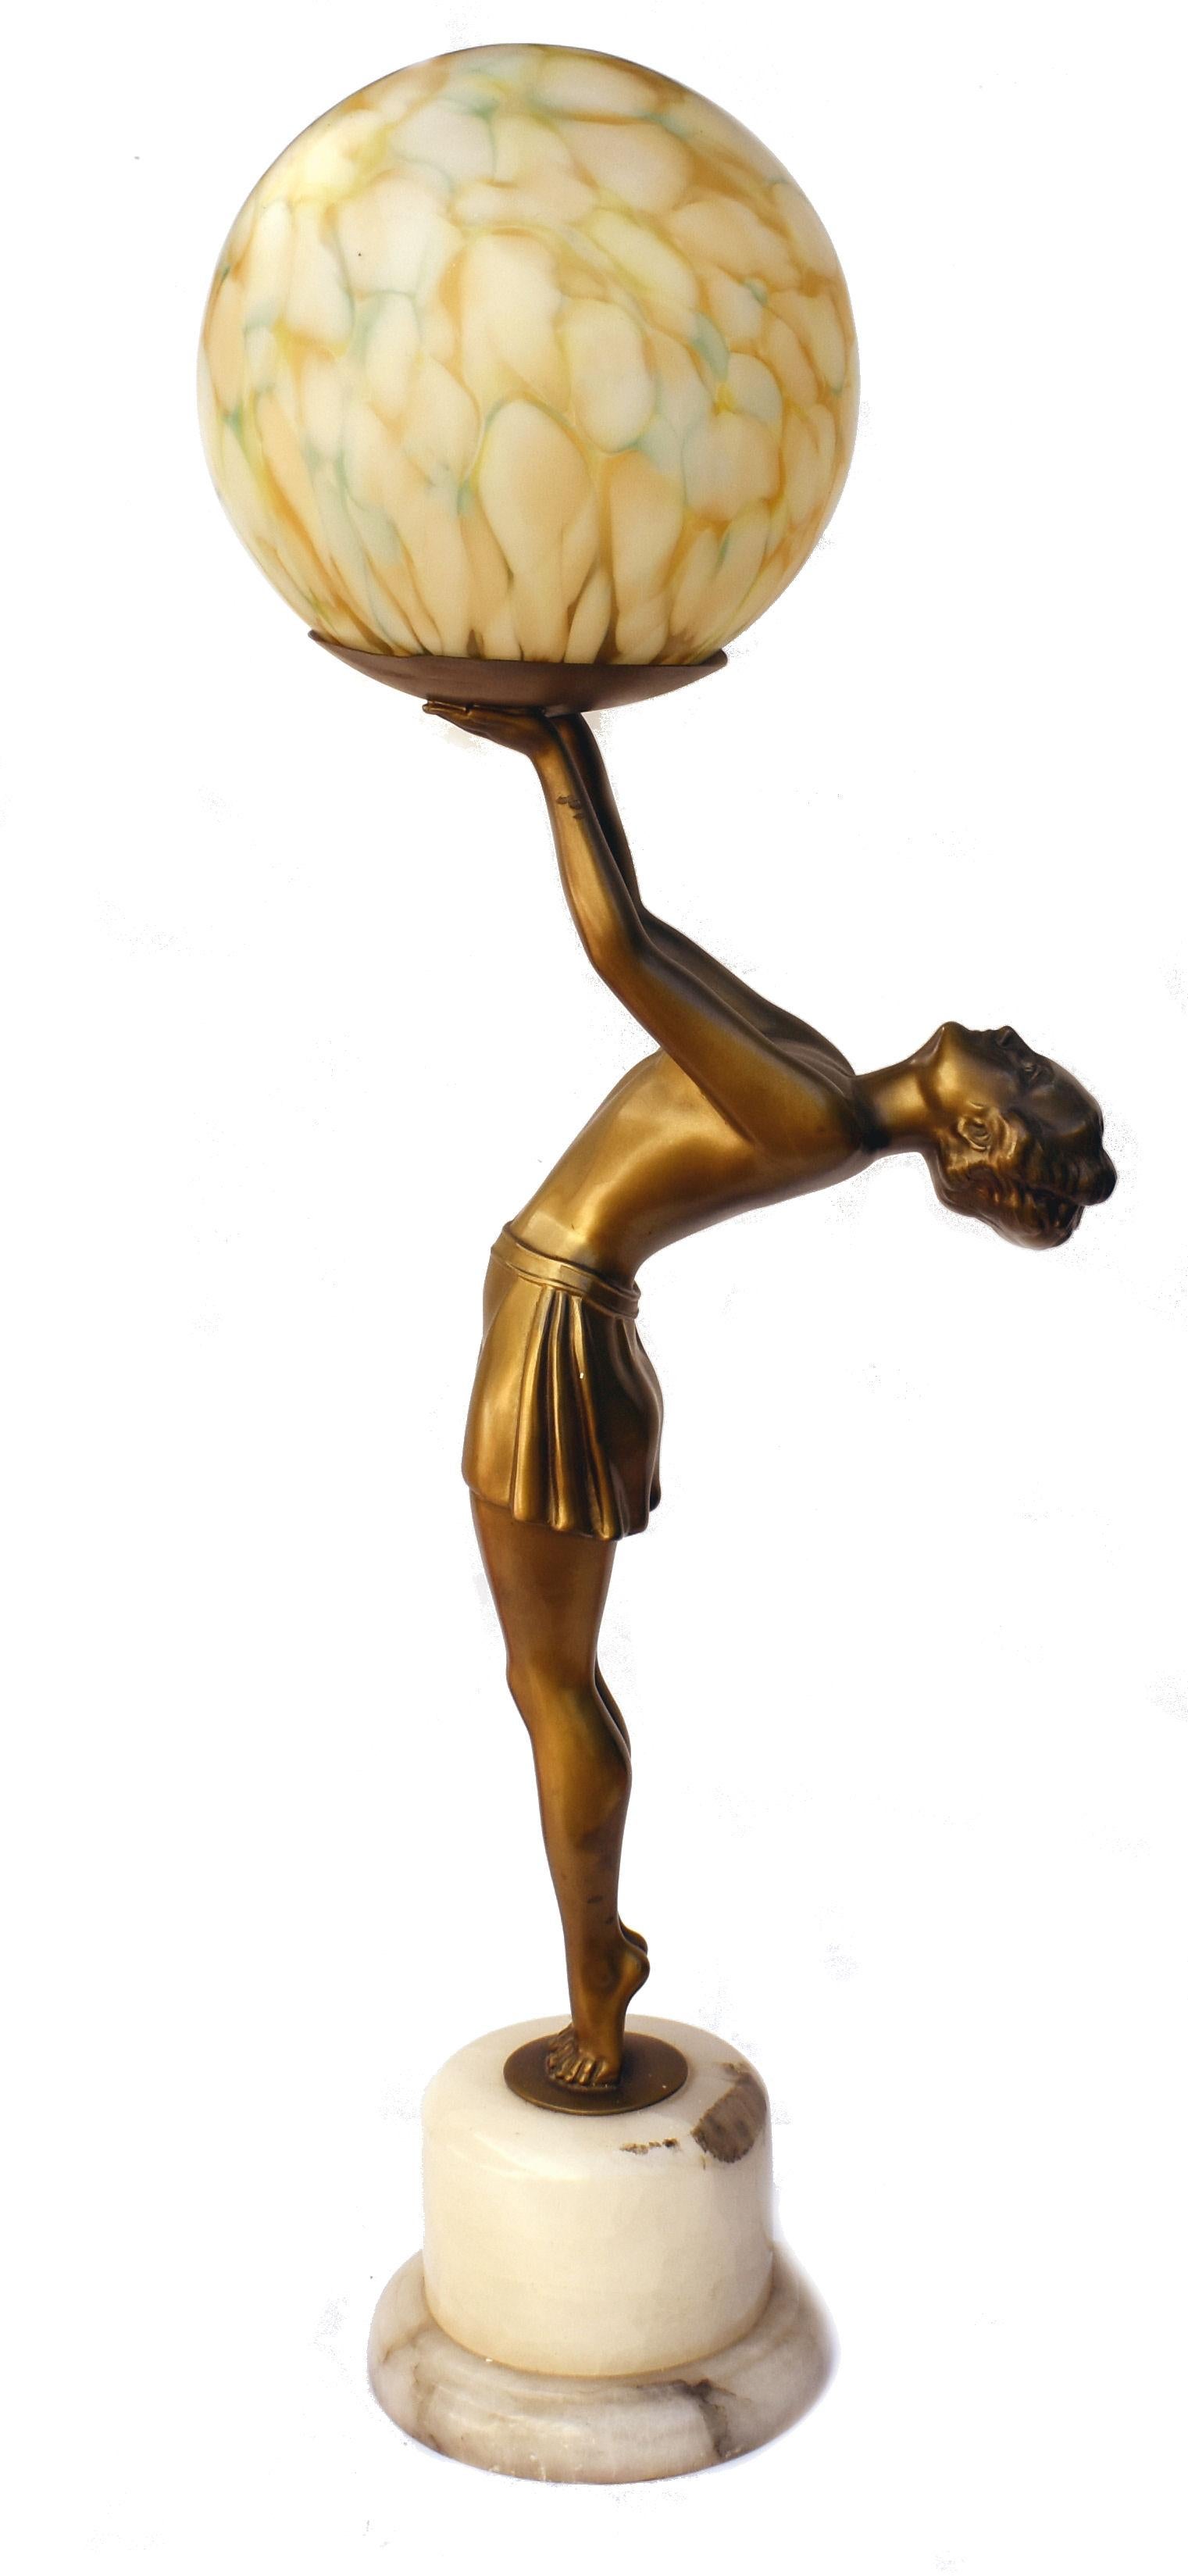 Standing almost 60cm tall is this genuinely beautiful spelter lady lamp. circa 1930, France, the spelter cold-painted in gold, tints of red and brown mounted on an alabaster base holding aloft an original glass globe. Made by Enrique Molins-Balleste